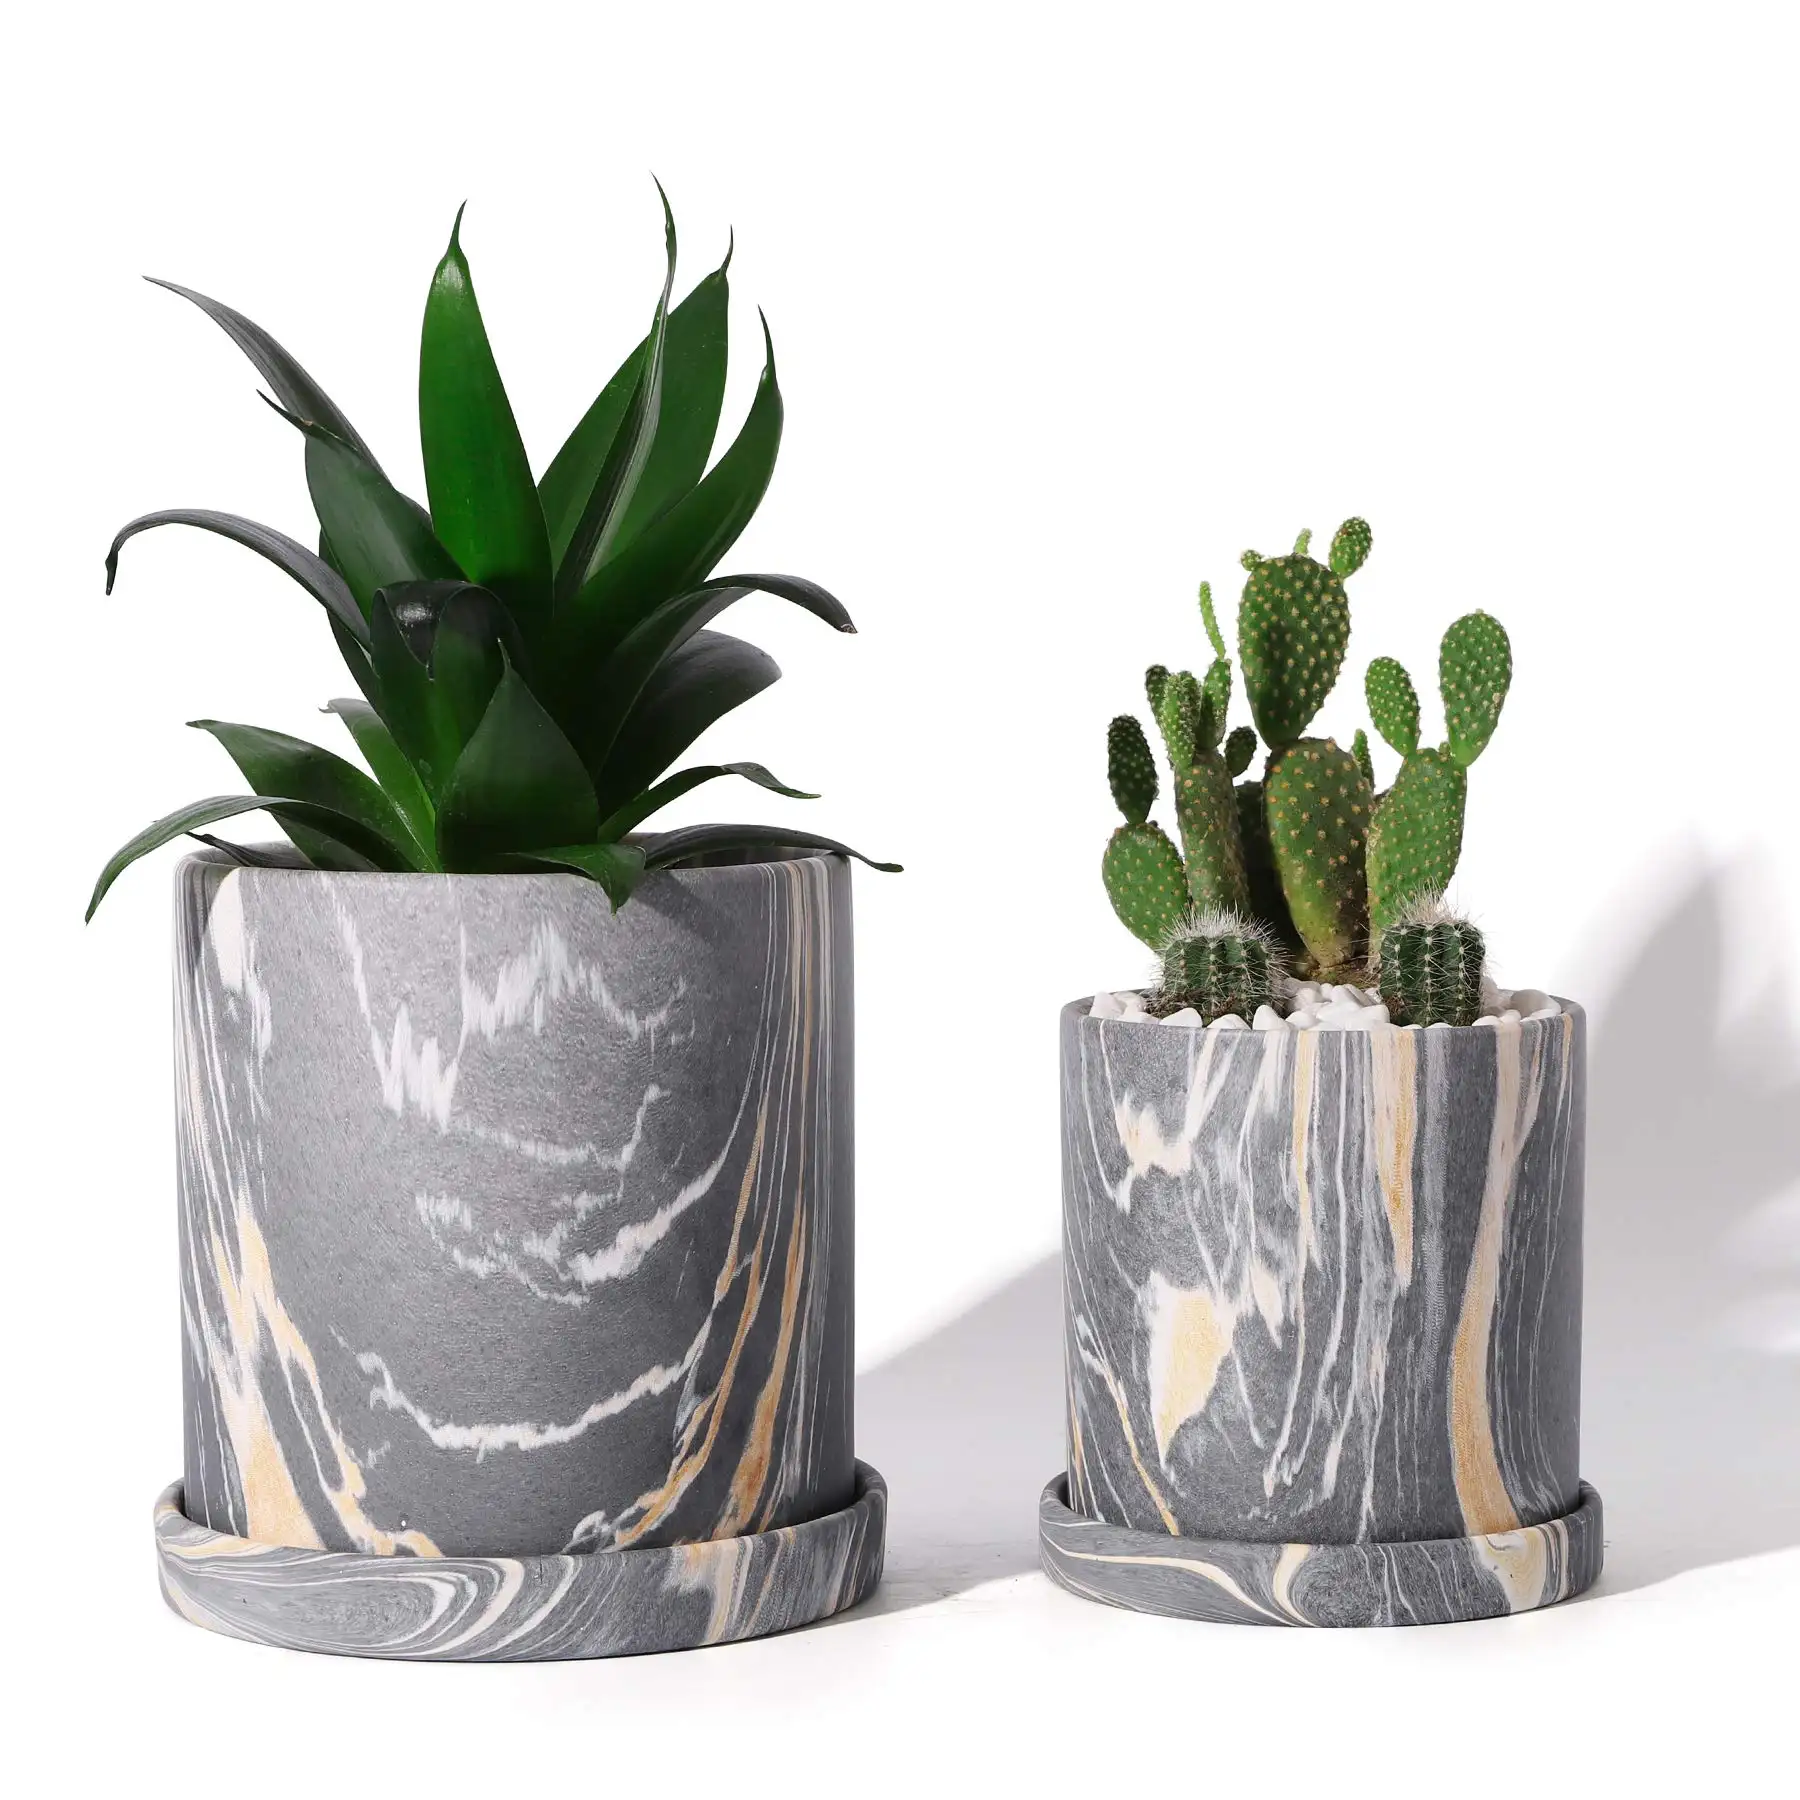 Set Of 2 (Gray) Terrazzo Ceramic Flower Plants Pots Planter 3.8 Inch + 5.1 Inch Marble Container Drainage With Saucer For Herb